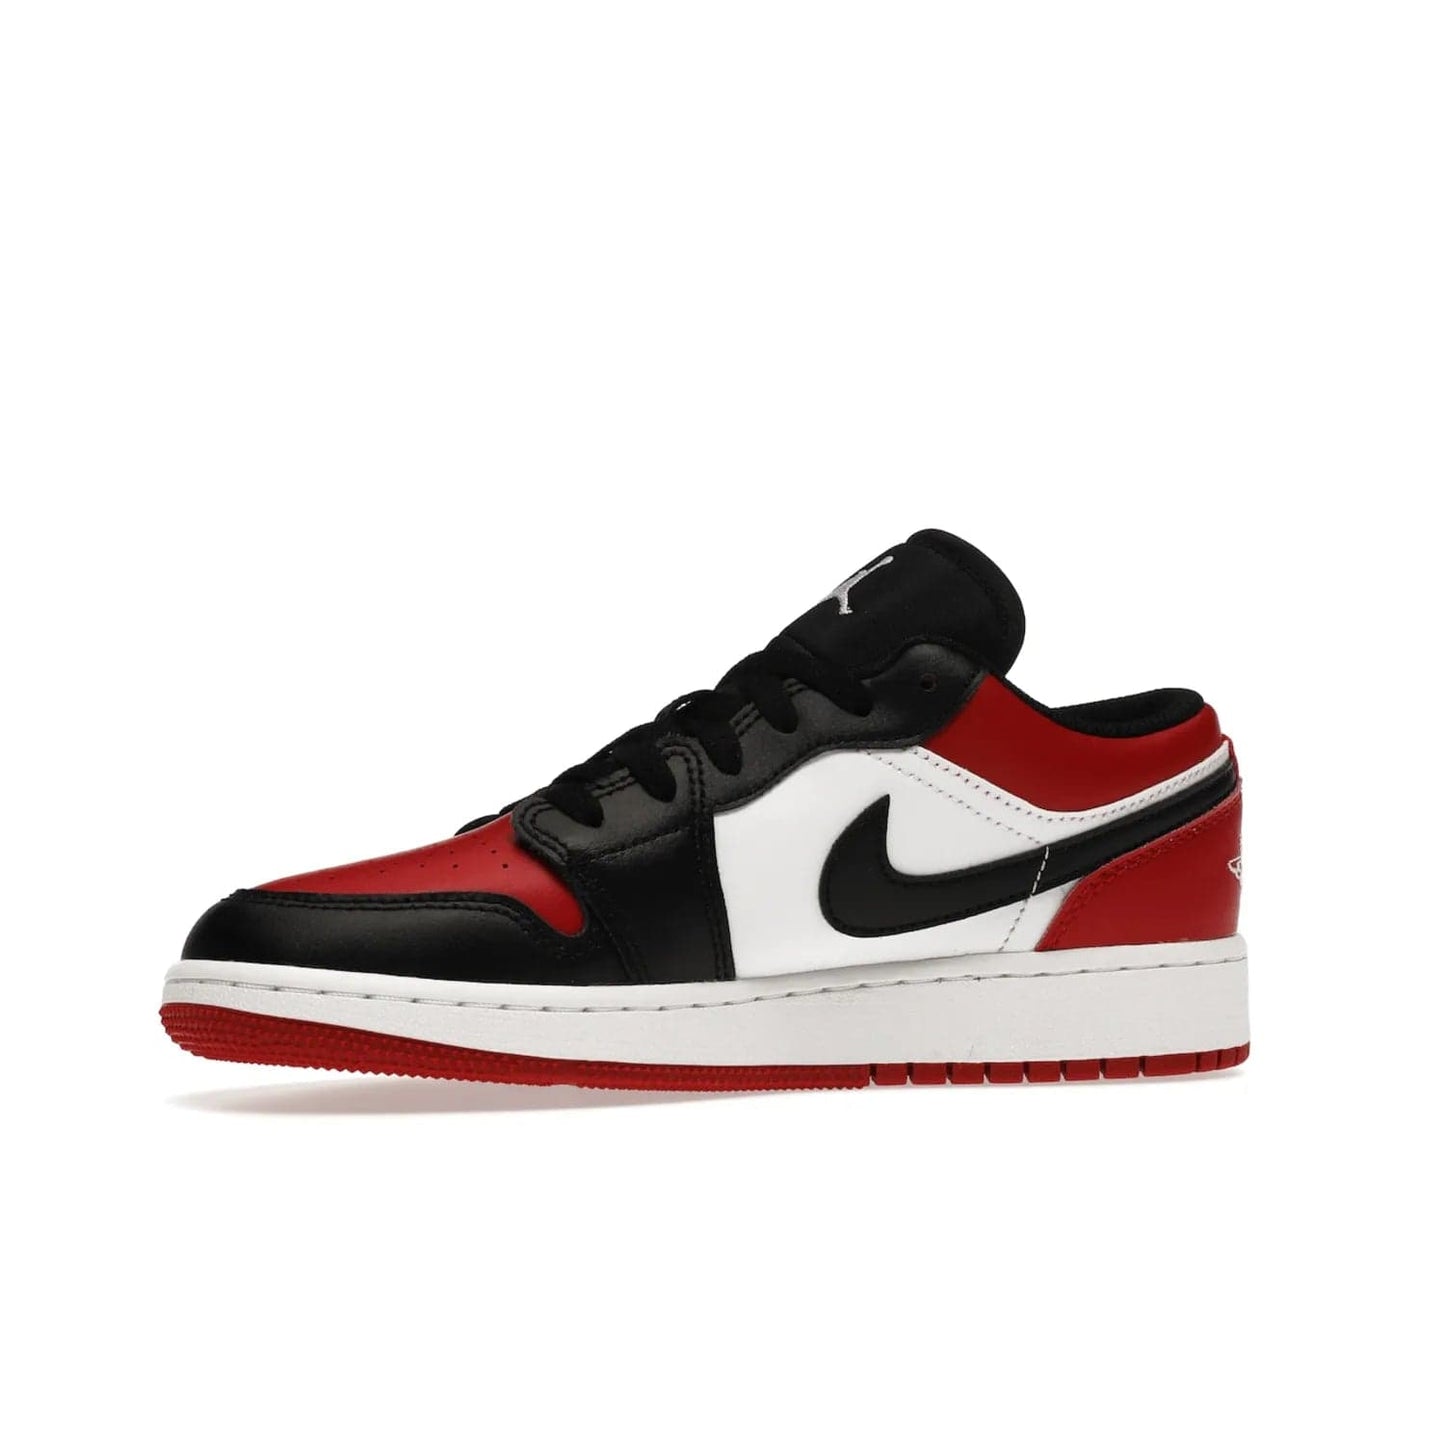 Jordan 1 Low Bred Toe (GS) - Image 17 - Only at www.BallersClubKickz.com - #
Iconic sneaker from Jordan brand with classic colorway, unique detailing & Air Jordan Wings logo. Step into the shoes of the greats with the Jordan 1 Low Bred Toe GS!